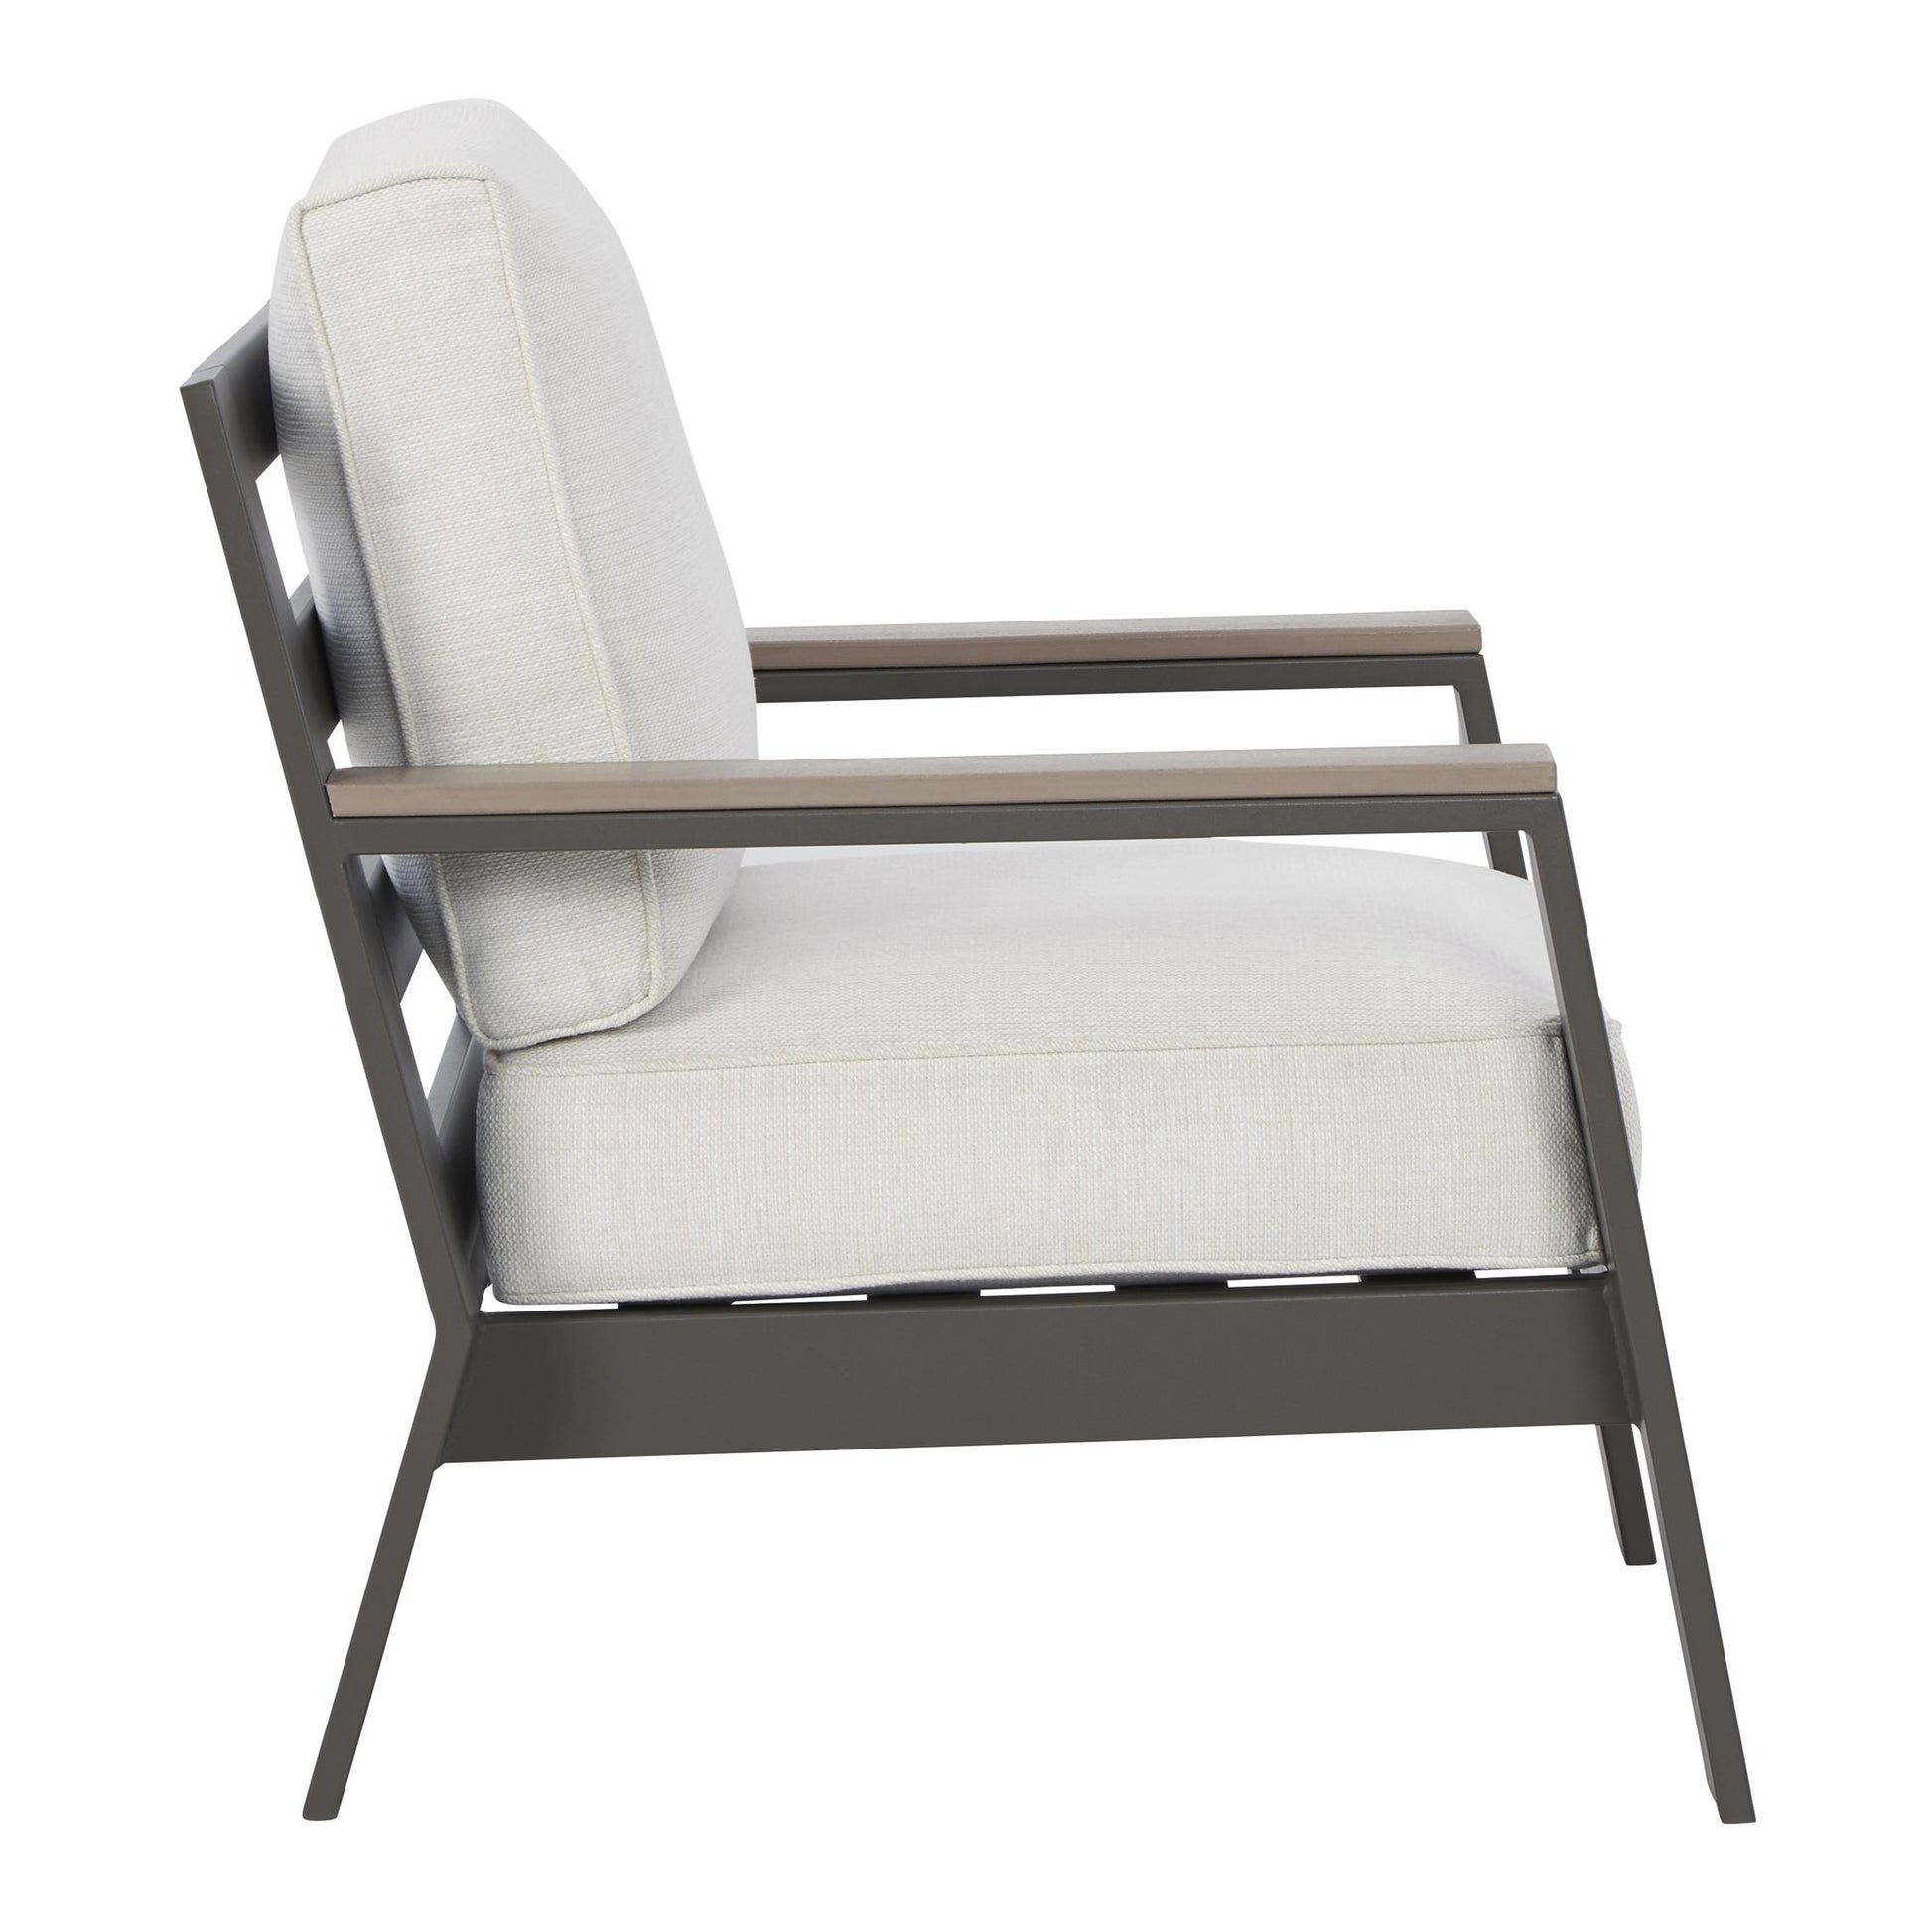 Signature Design by Ashley Outdoor Seating Lounge Chairs P514-820 IMAGE 3